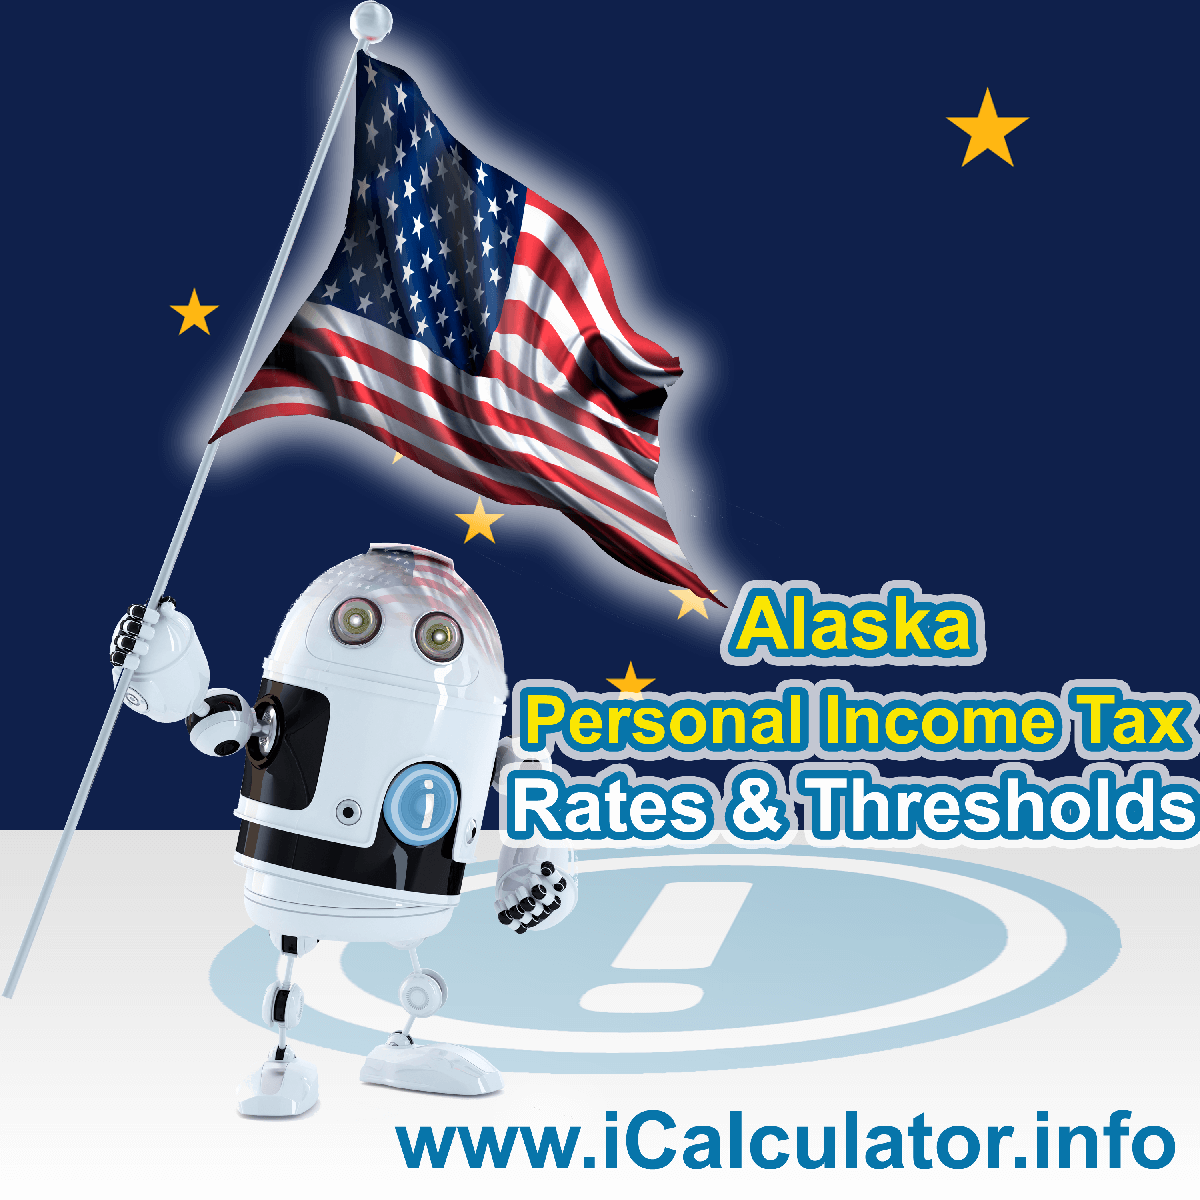 Alaska State Tax Tables 2020. This image displays details of the Alaska State Tax Tables for the 2020 tax return year which is provided in support of the 2020 US Tax Calculator